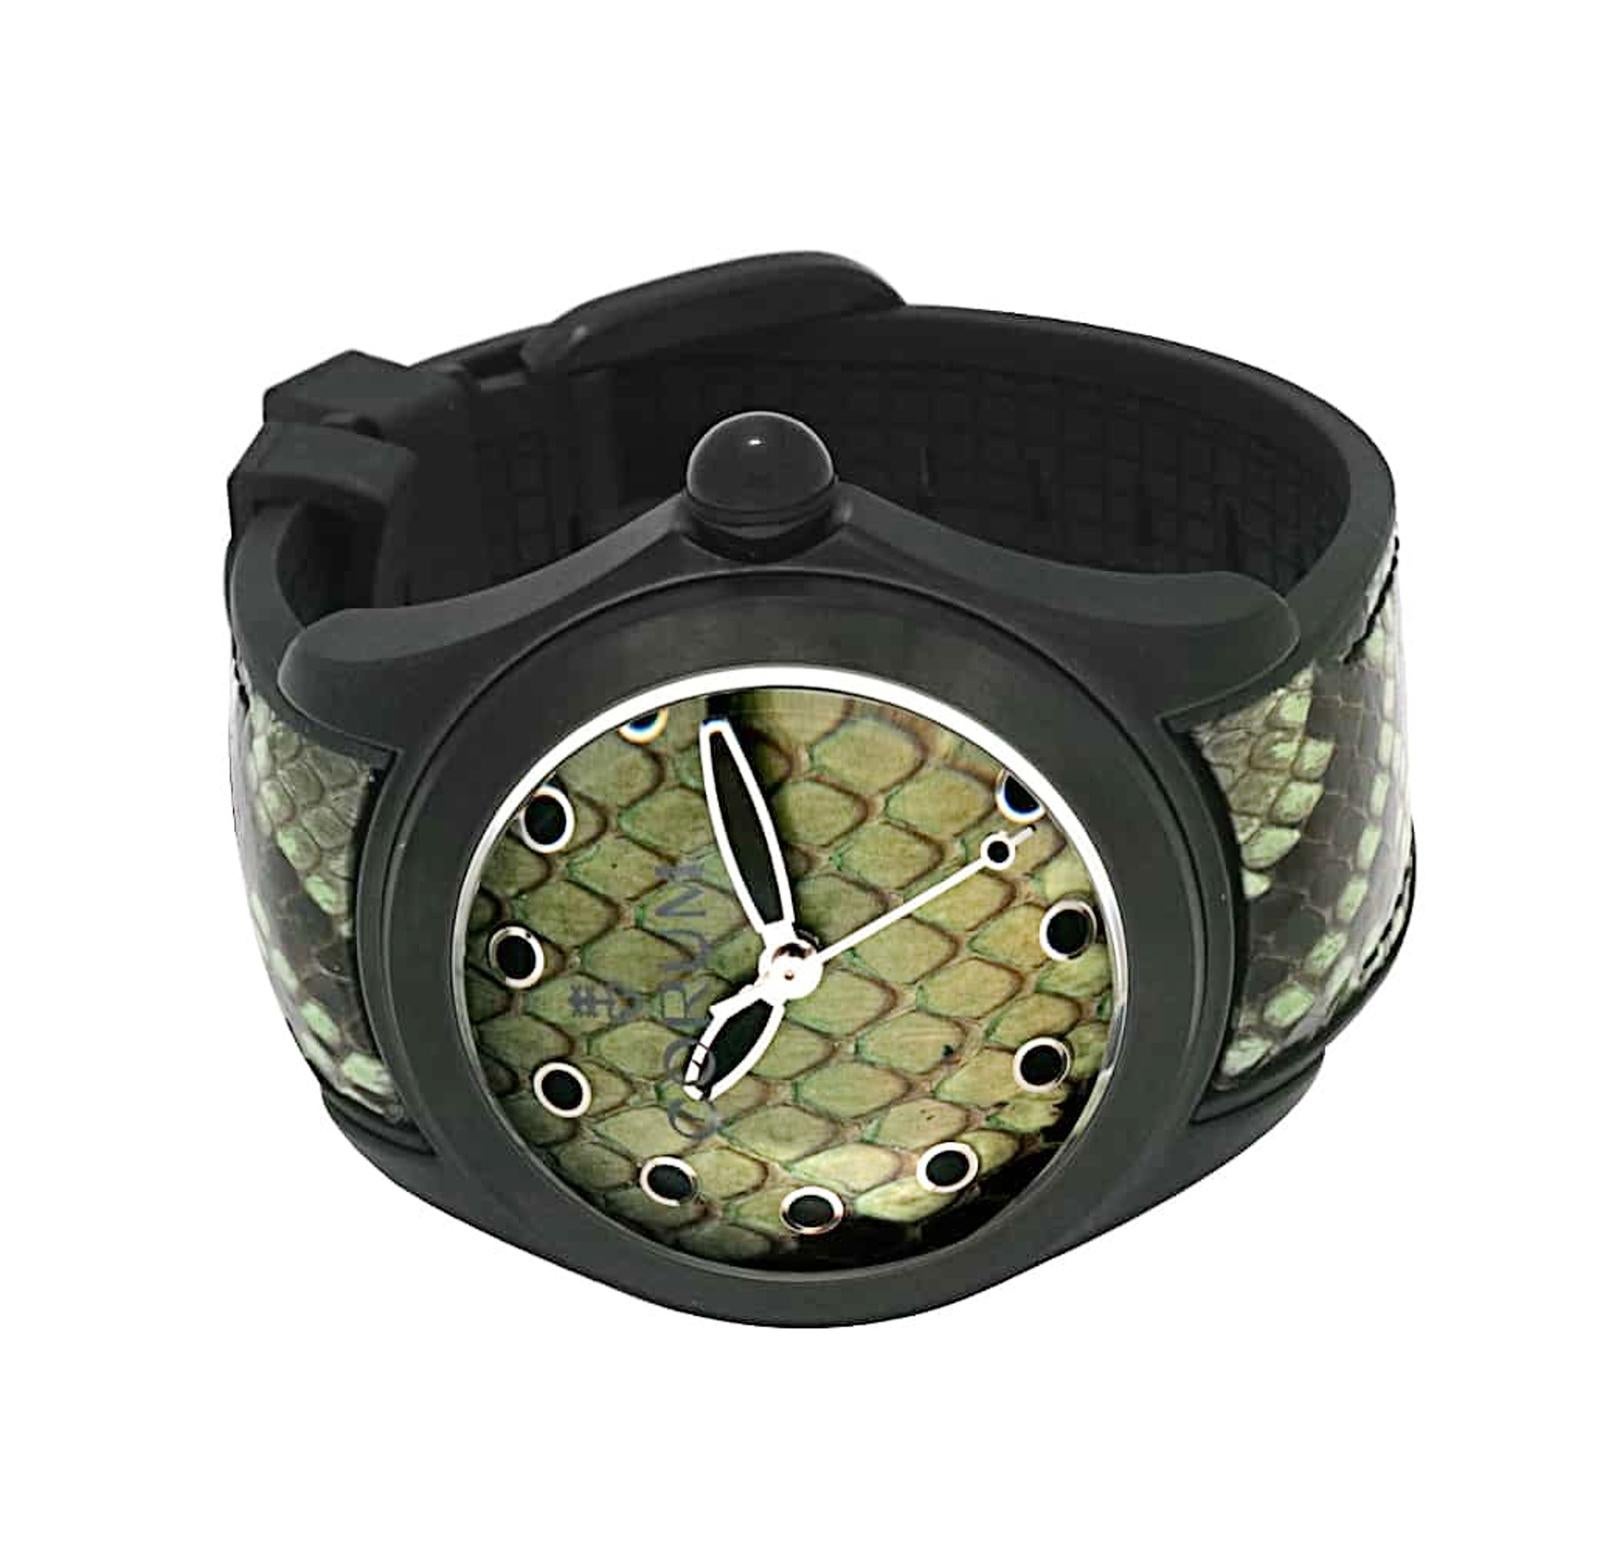 CORUM BUBBLE 42 PYTHON PVD COATED AUTOMATIC WATCH 082.410.98/0337 PV01

-Limited Edition
-New
-Case size: 42mm
-Movement: Automatic
-Stainless steel
-Case thickness: 17mm
-Scratch Resistant Sapphire
-Strap Color: Green
-Bezel: Fixed

*Comes with Box